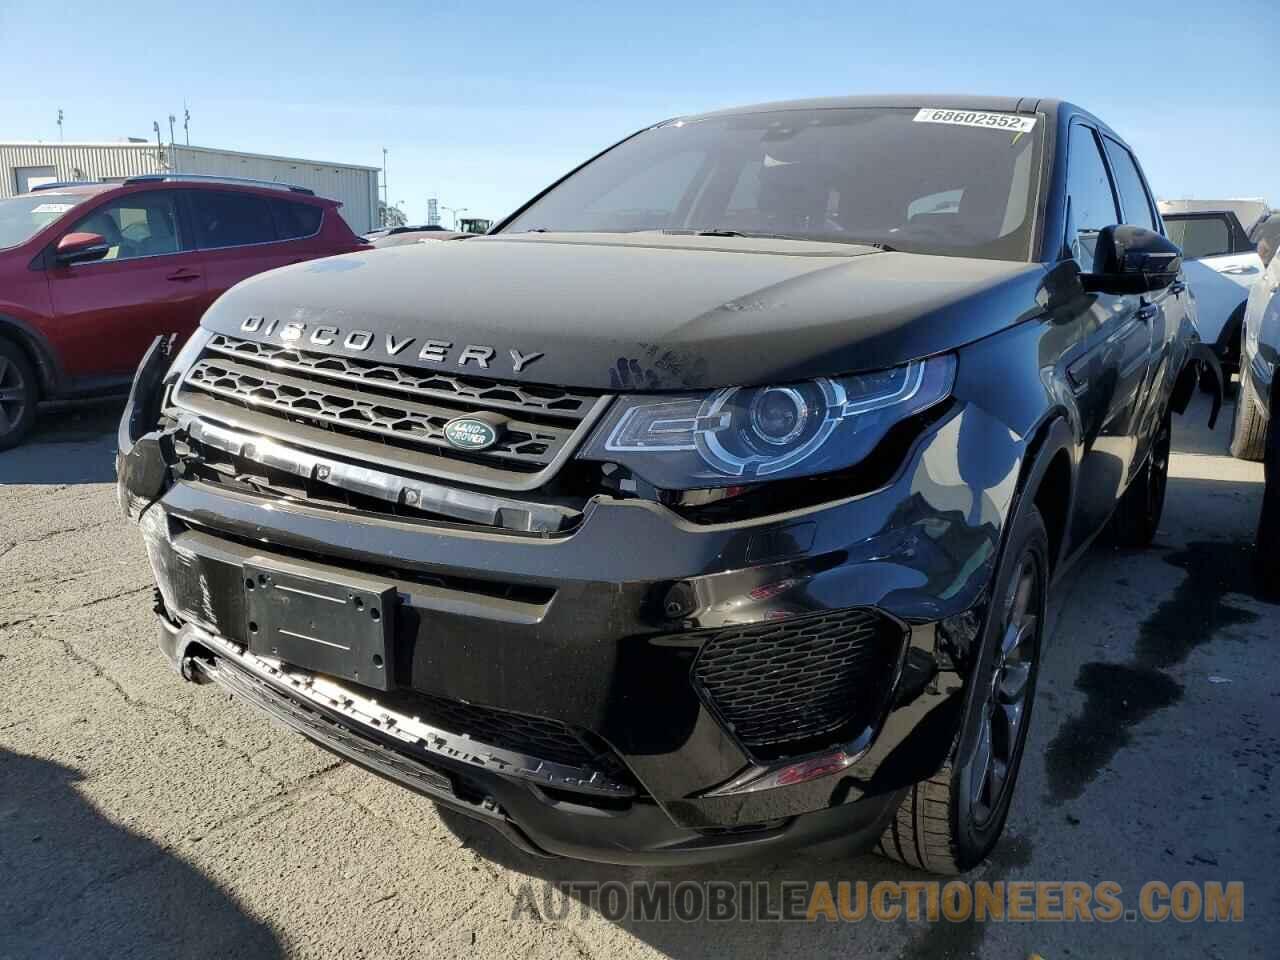 SALCR2FXXKH786034 LAND ROVER DISCOVERY 2019